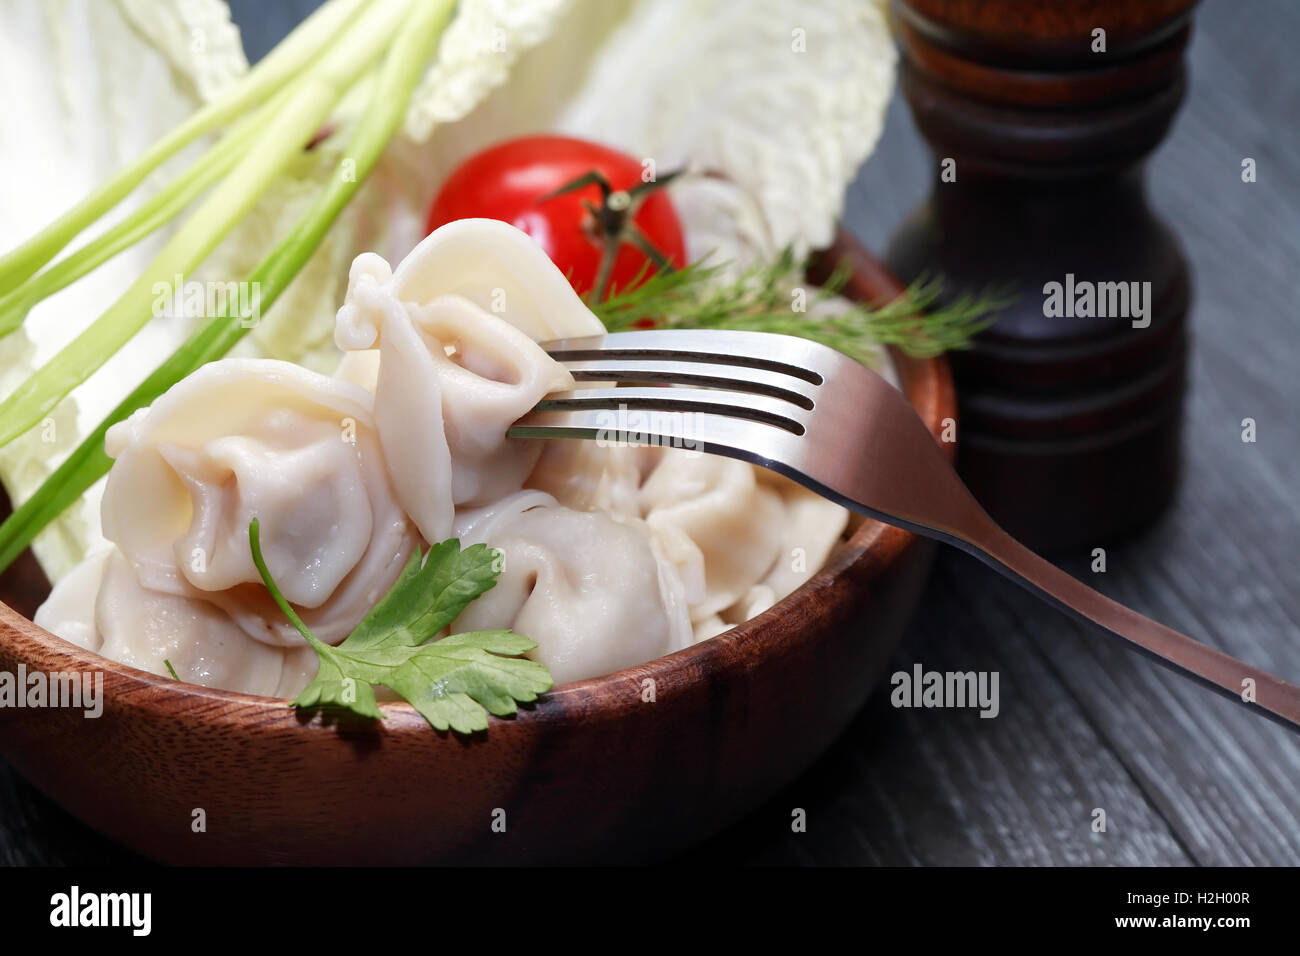 Dish with ravioli with fork. Also tomato and salad Stock Photo